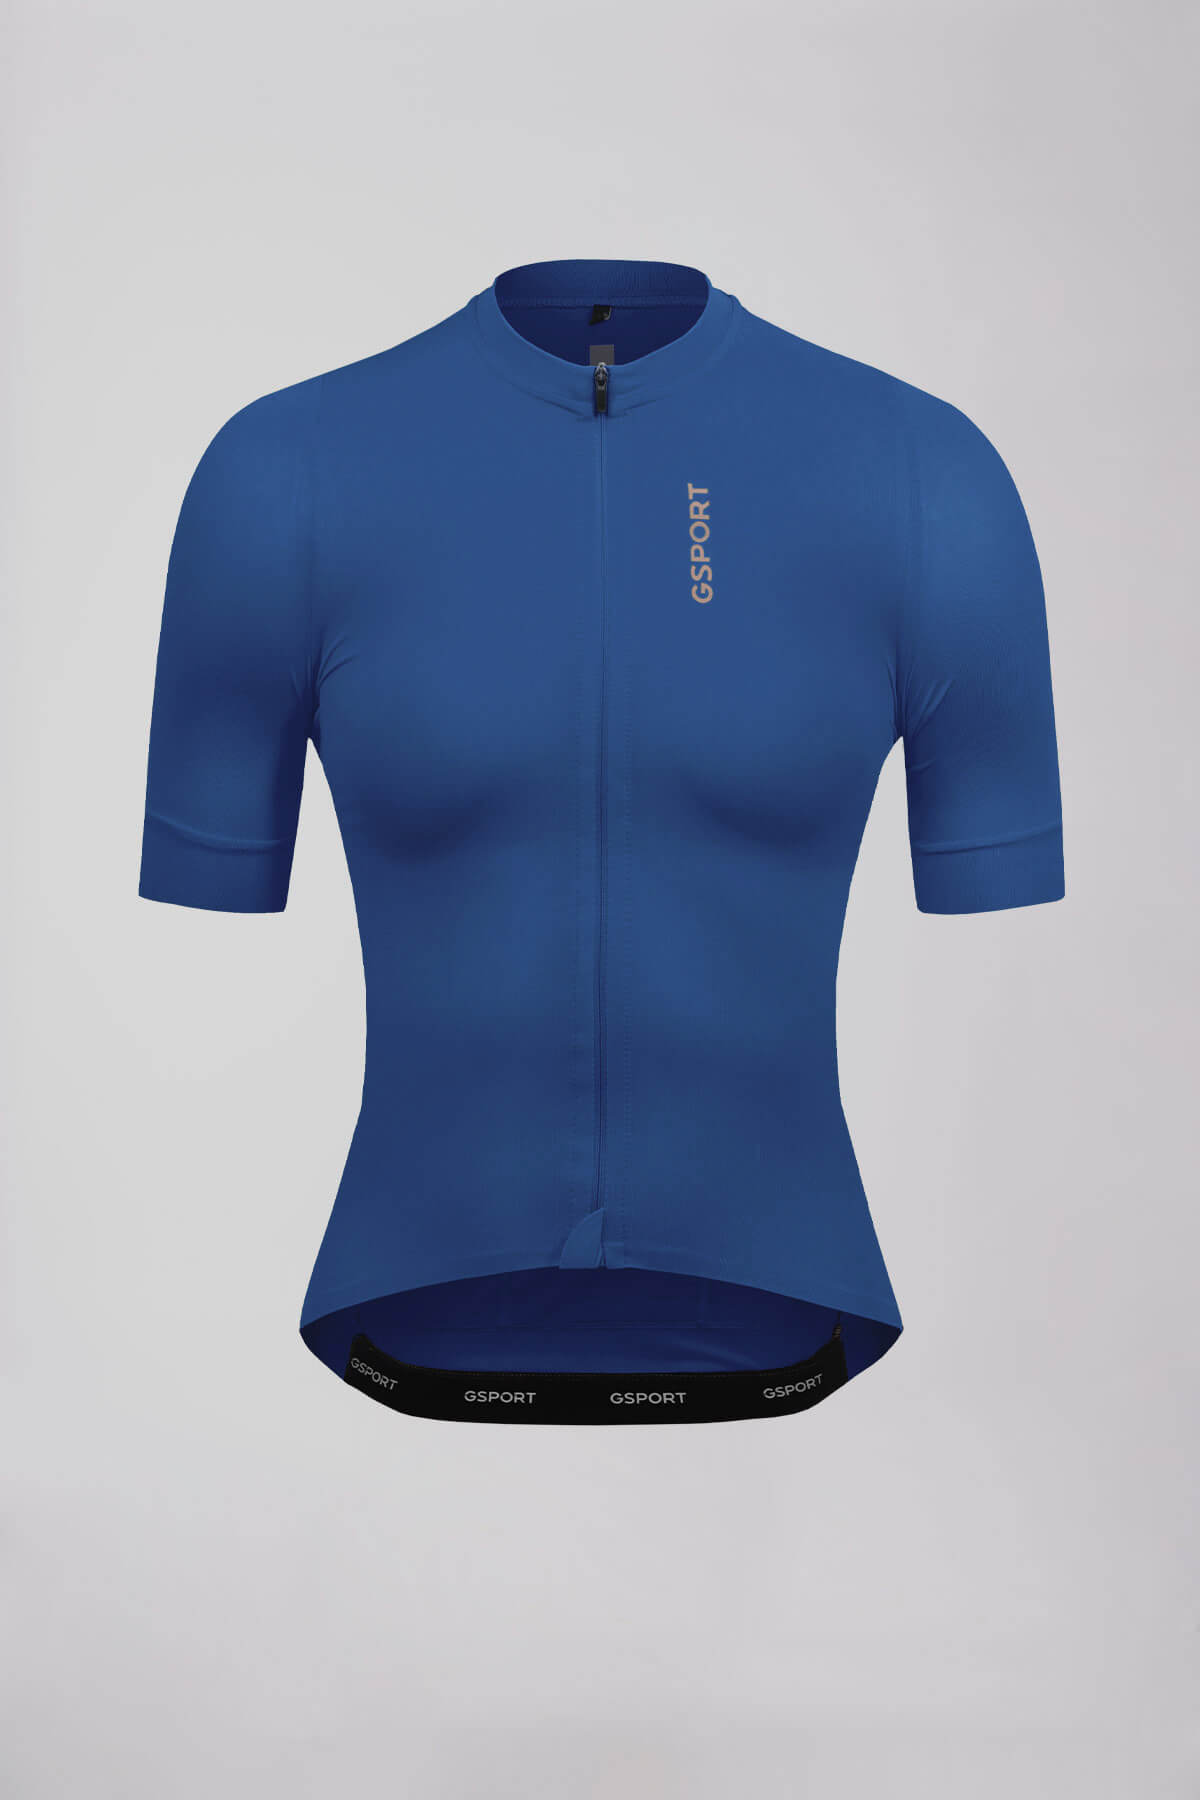 Maillot One Blue Tropic Mujer - Nueva Temporada SS24 - Gsport Cycling